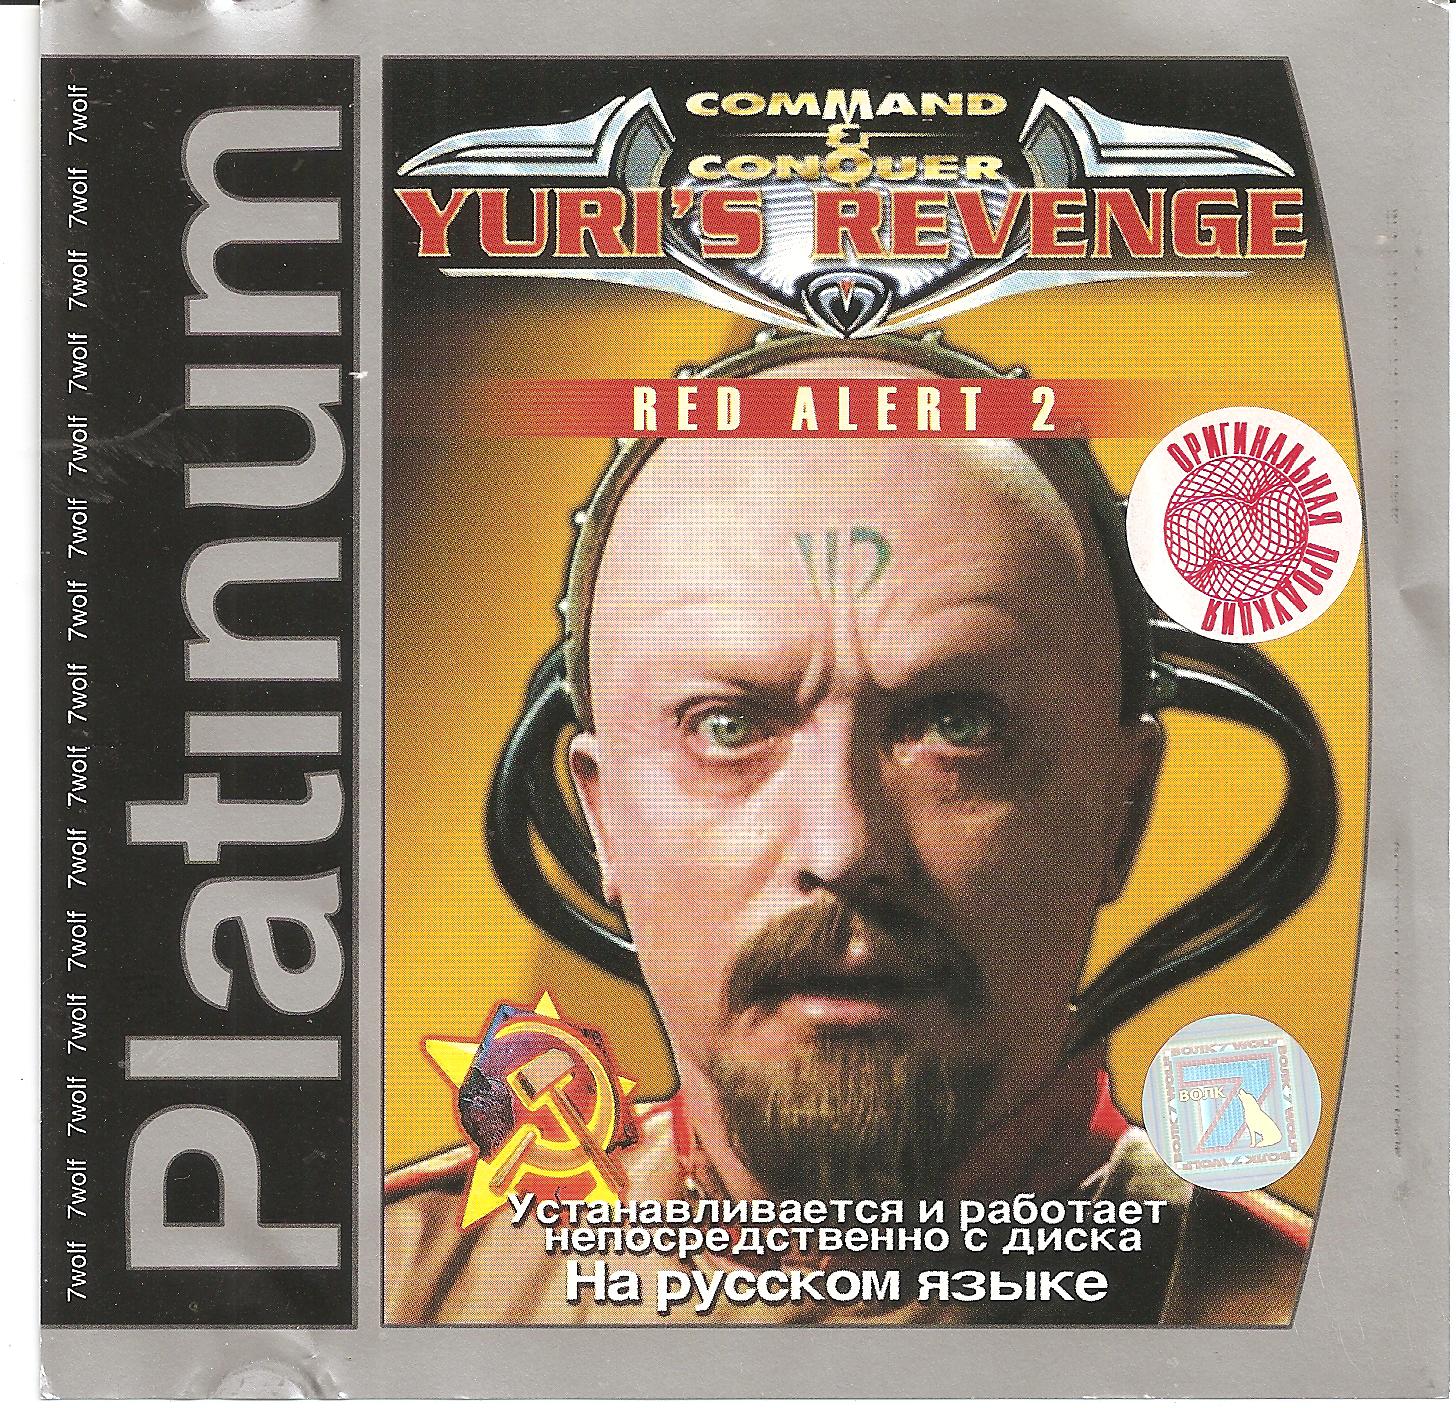 Did your uncle. Red Alert 2 обложка. Command Conquer Red Alert 2 обложка.